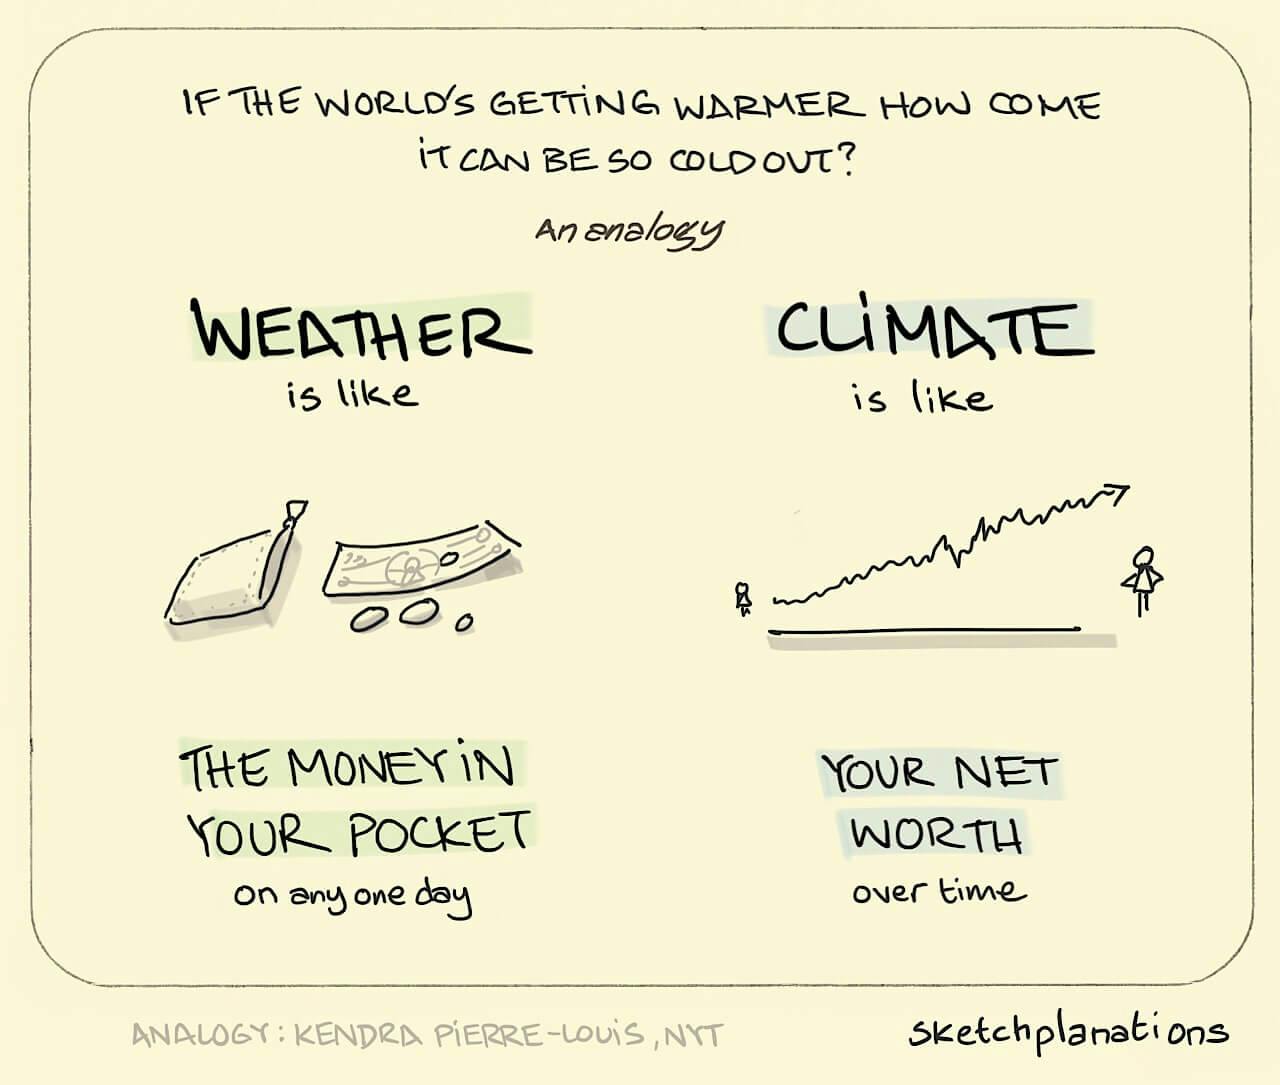 Weather and Climate illustration: weather is likened to the notes and loose change kept in your purse and the climate is likened to a graph showing your financial status over a long period of time. 